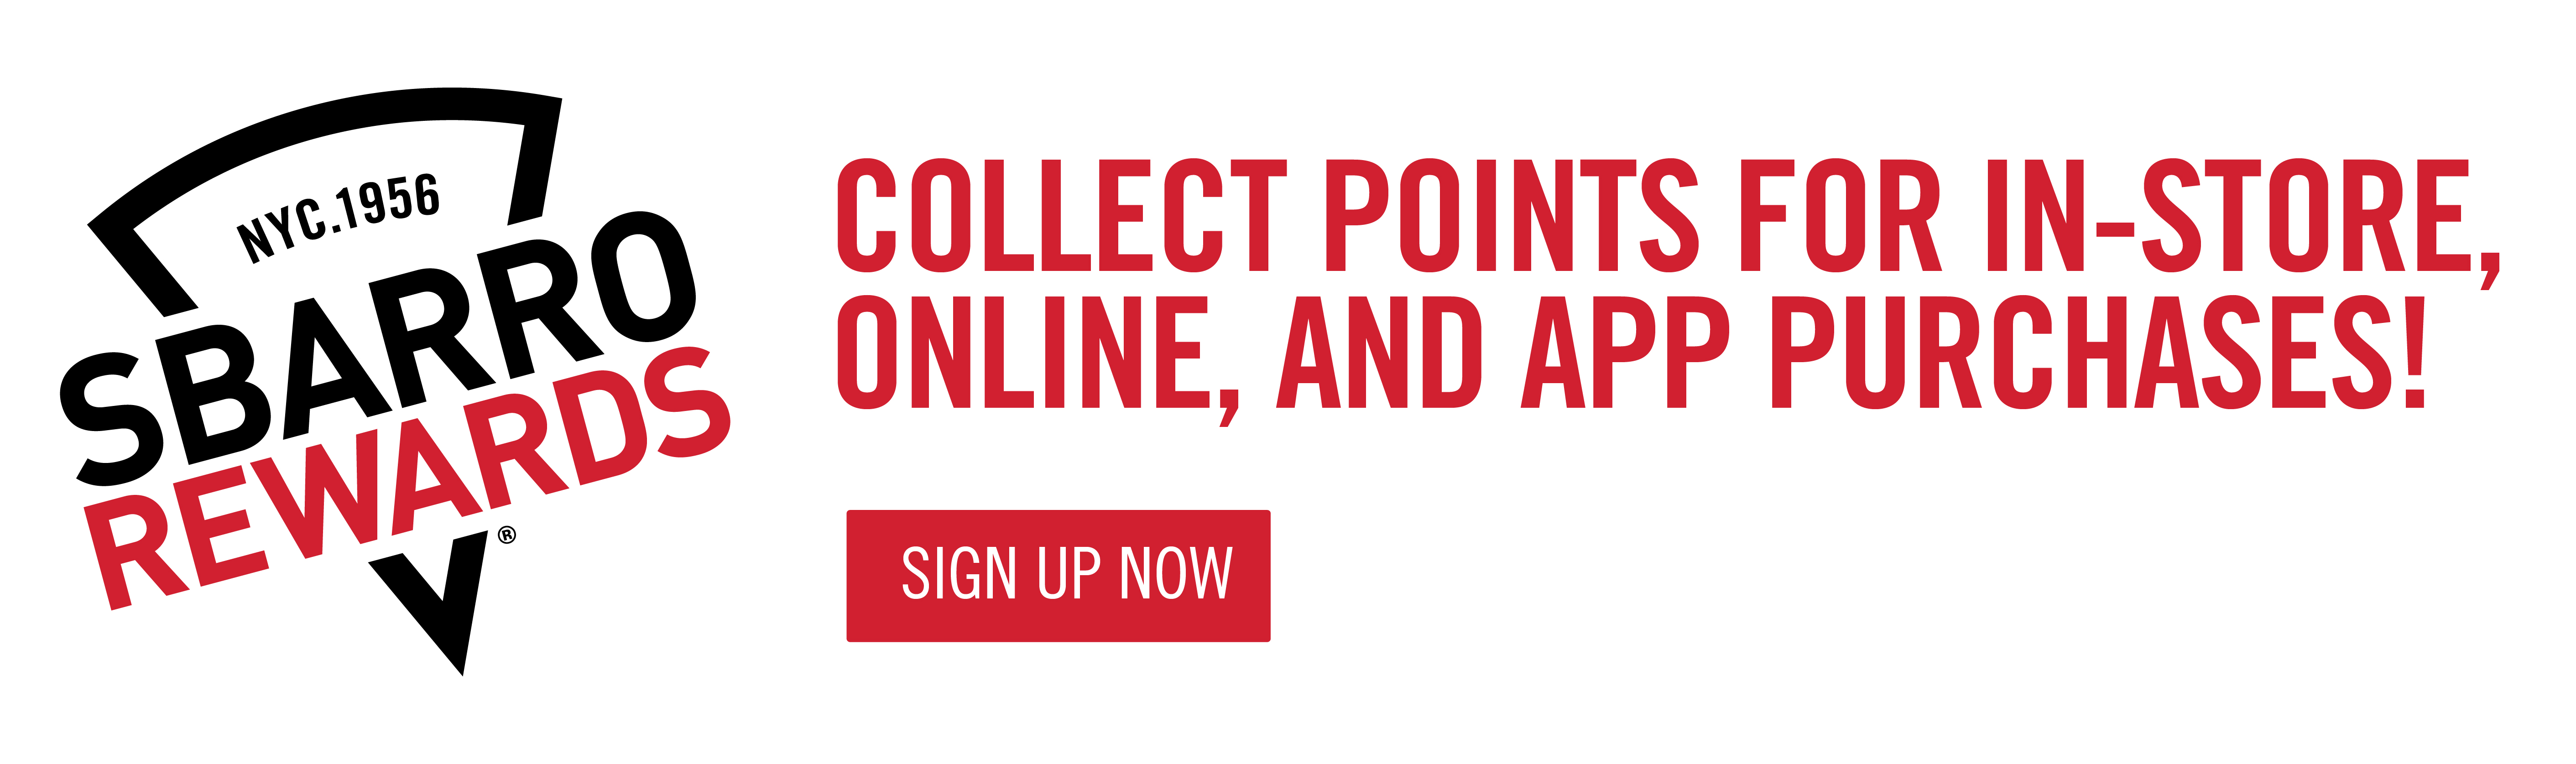 Sign up for Sbarro Rewards to collect points on all purchases to earn rewards